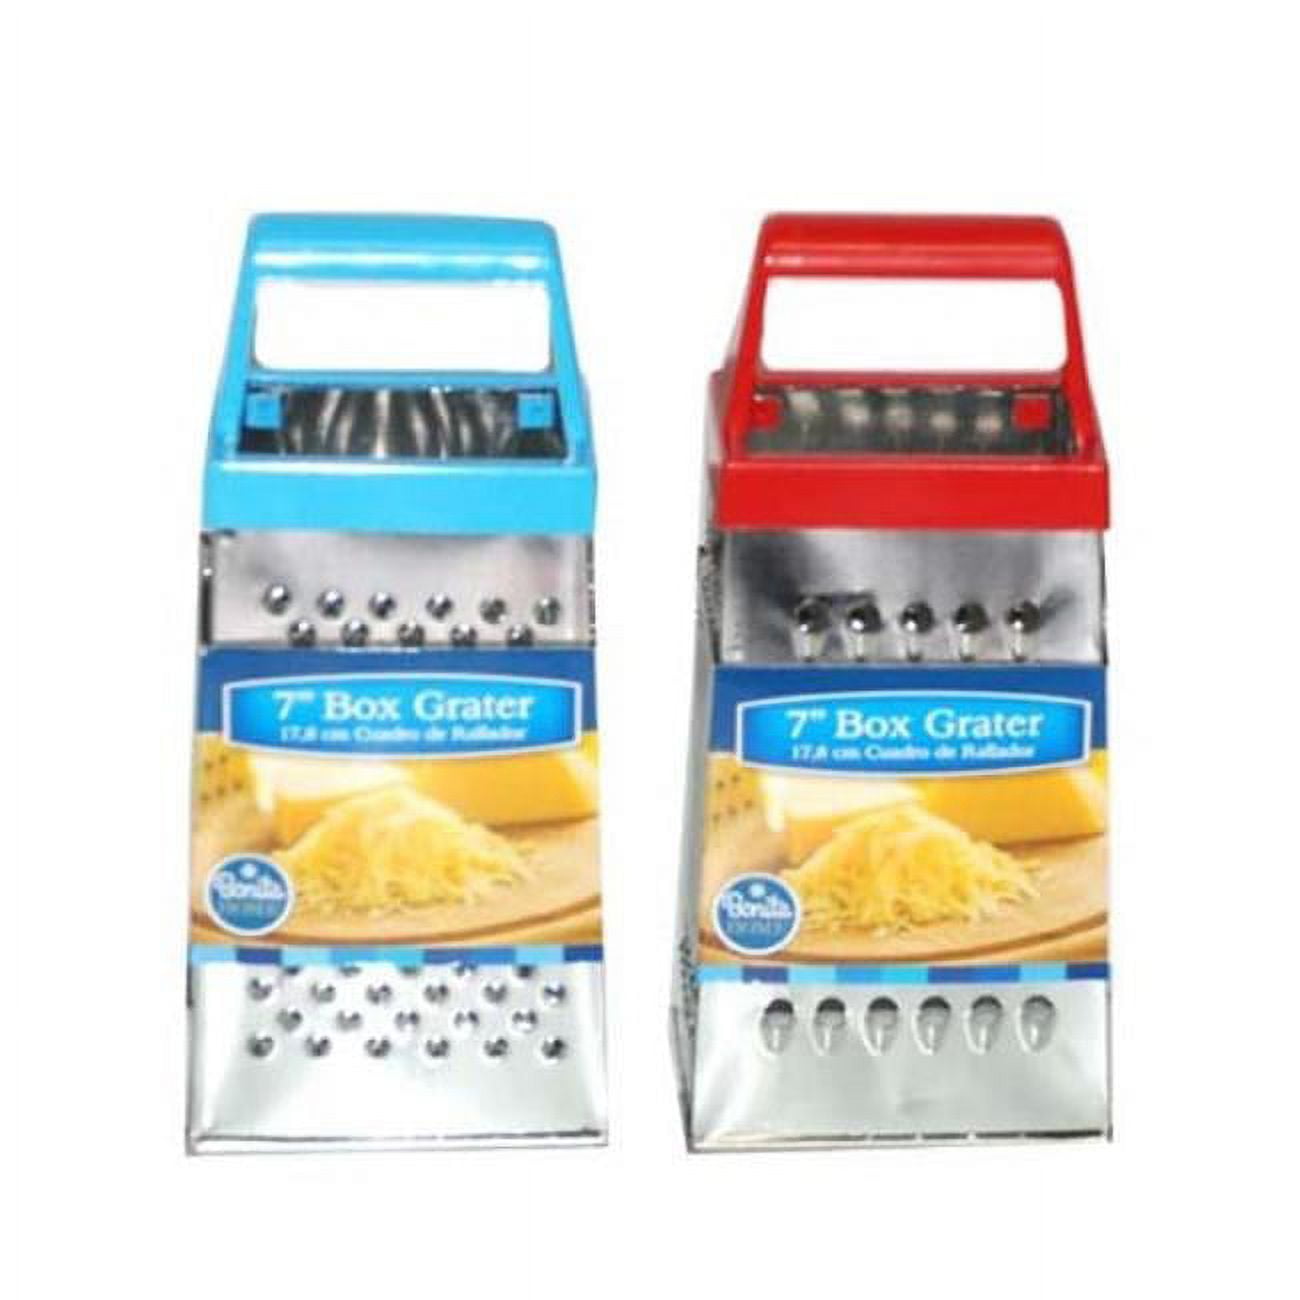 2324319 7 In. 4 Sided Grater, 2 Colors - Case Of 48